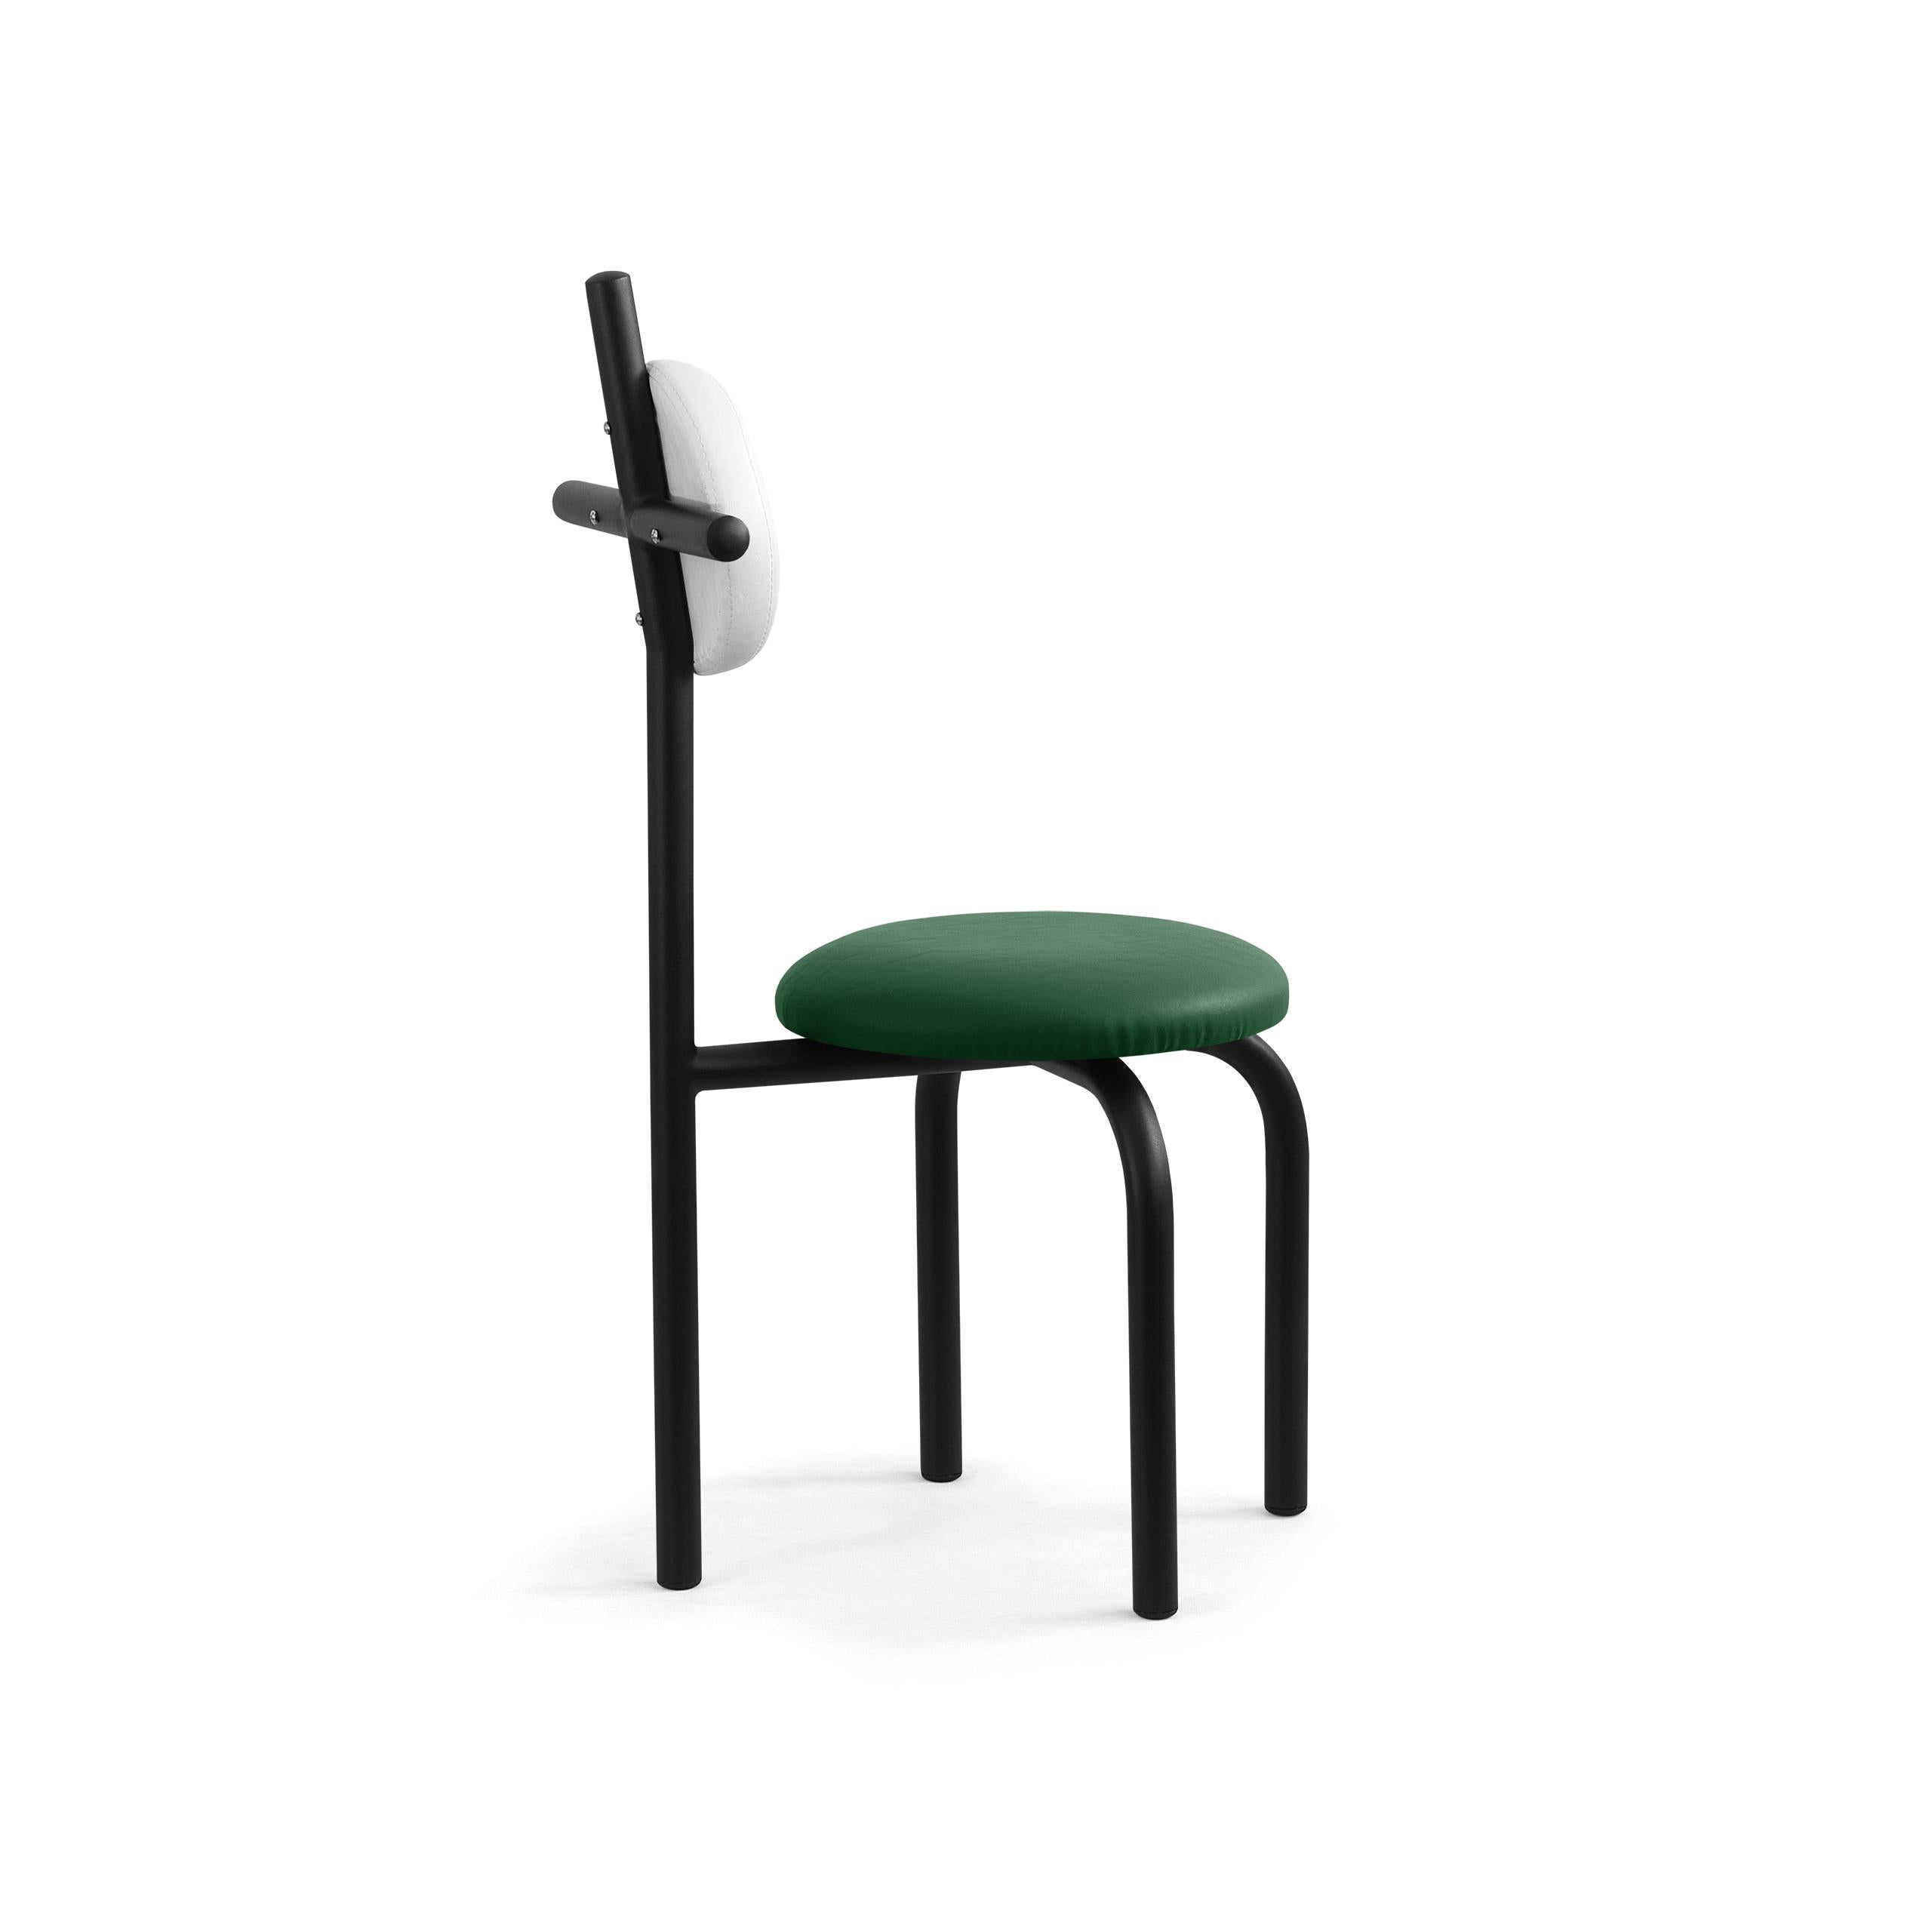 Appliqué PK16 Impermeable Chair, Green Seat & Carbon Steel Structure by Paulo Kobylka For Sale